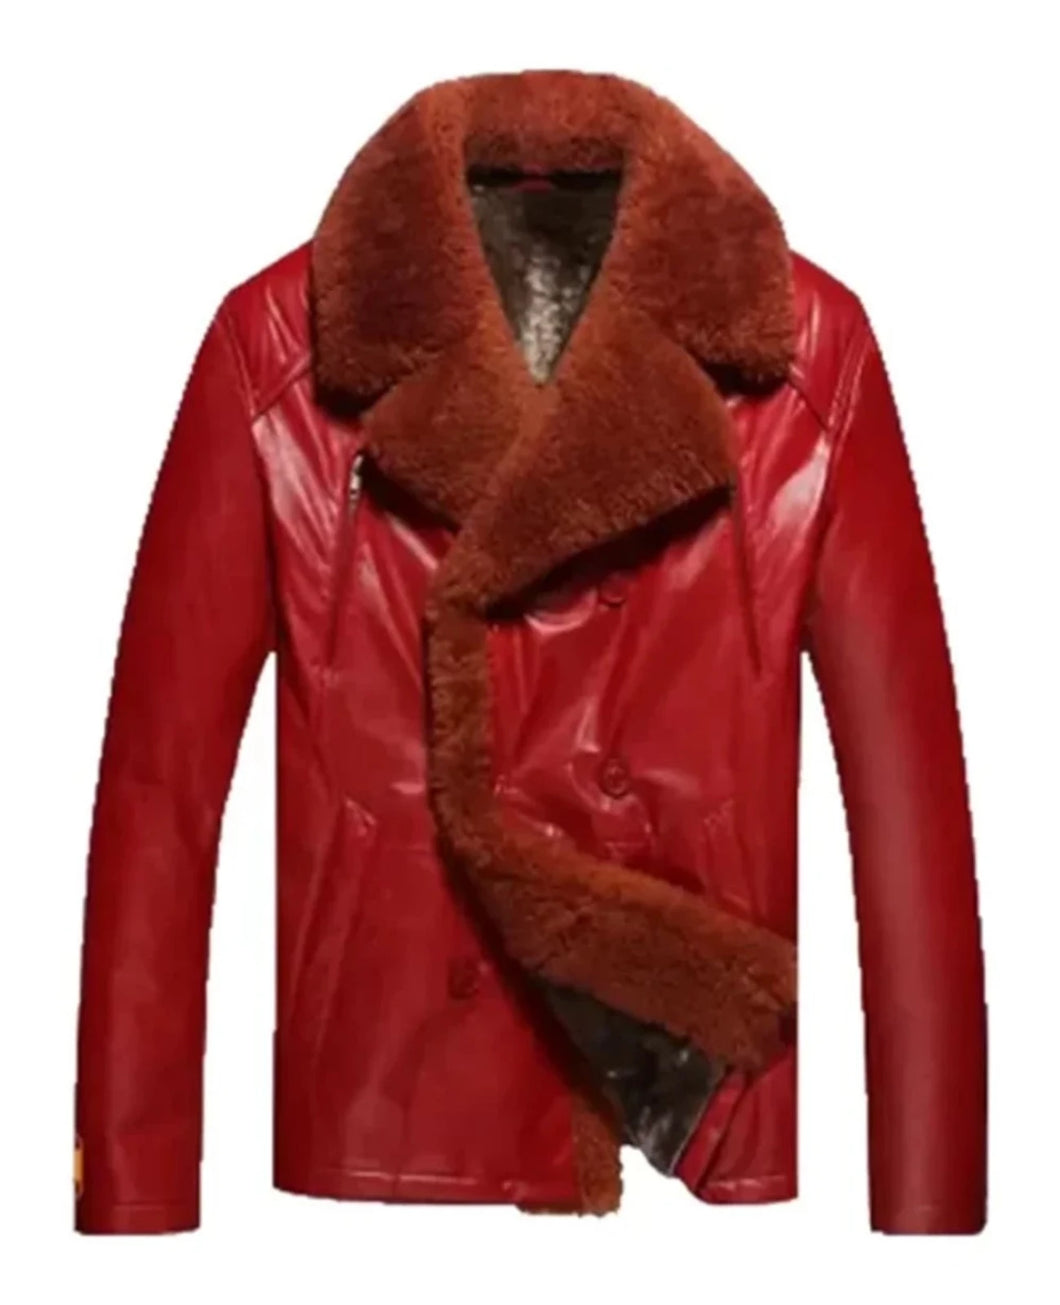 Unisex Red Shearling Leather Jacket